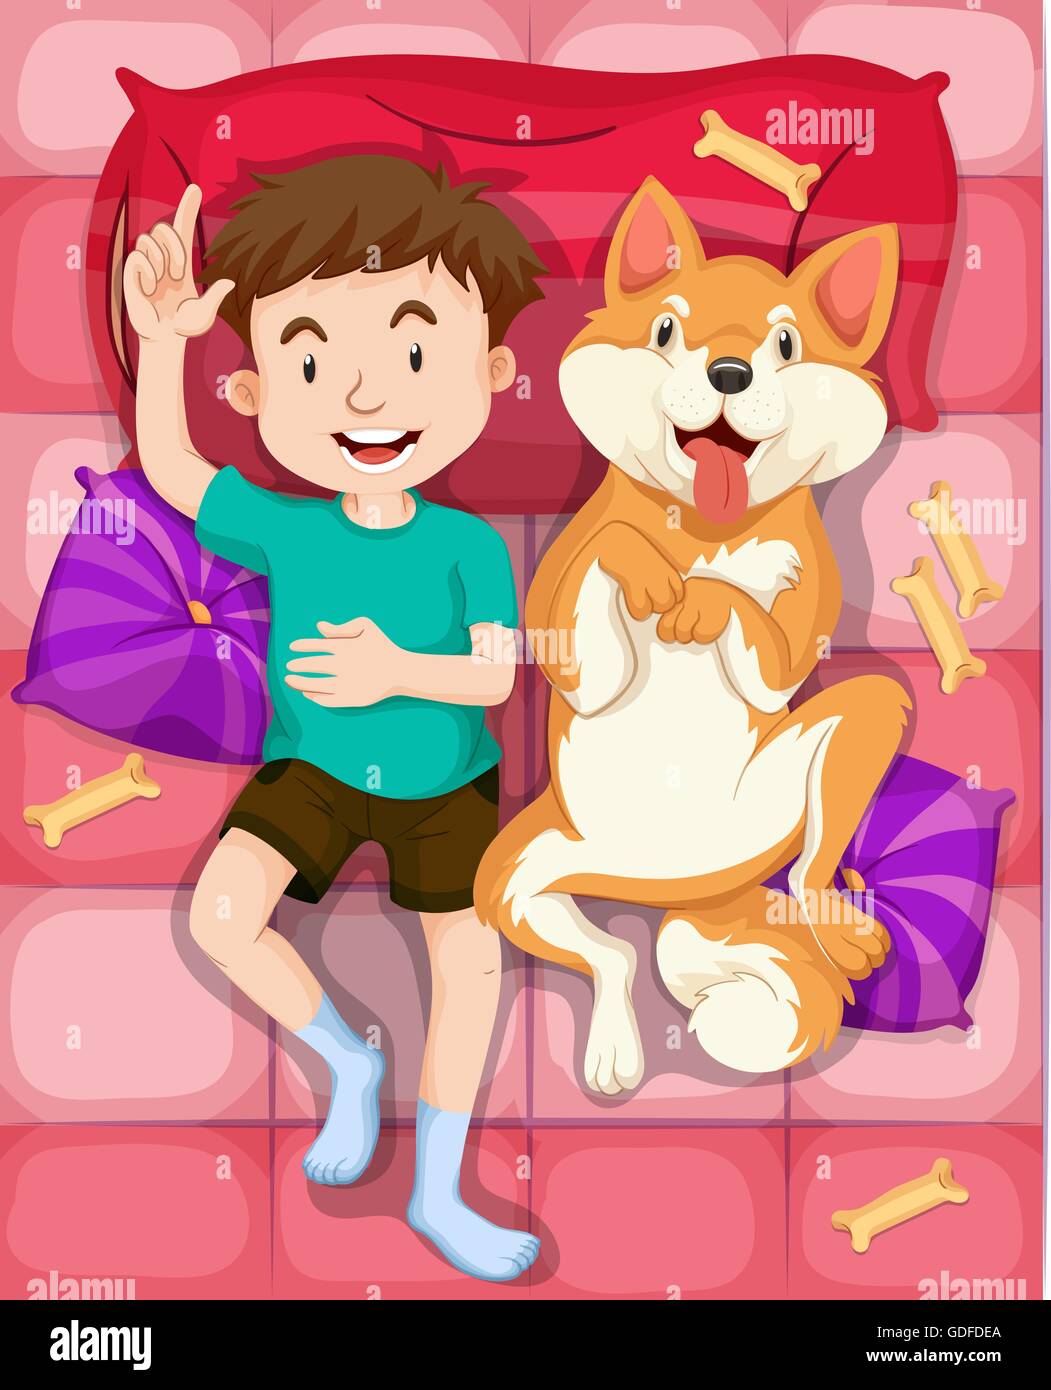 Boy and pet dog sleeping on bed illustration Stock Vector